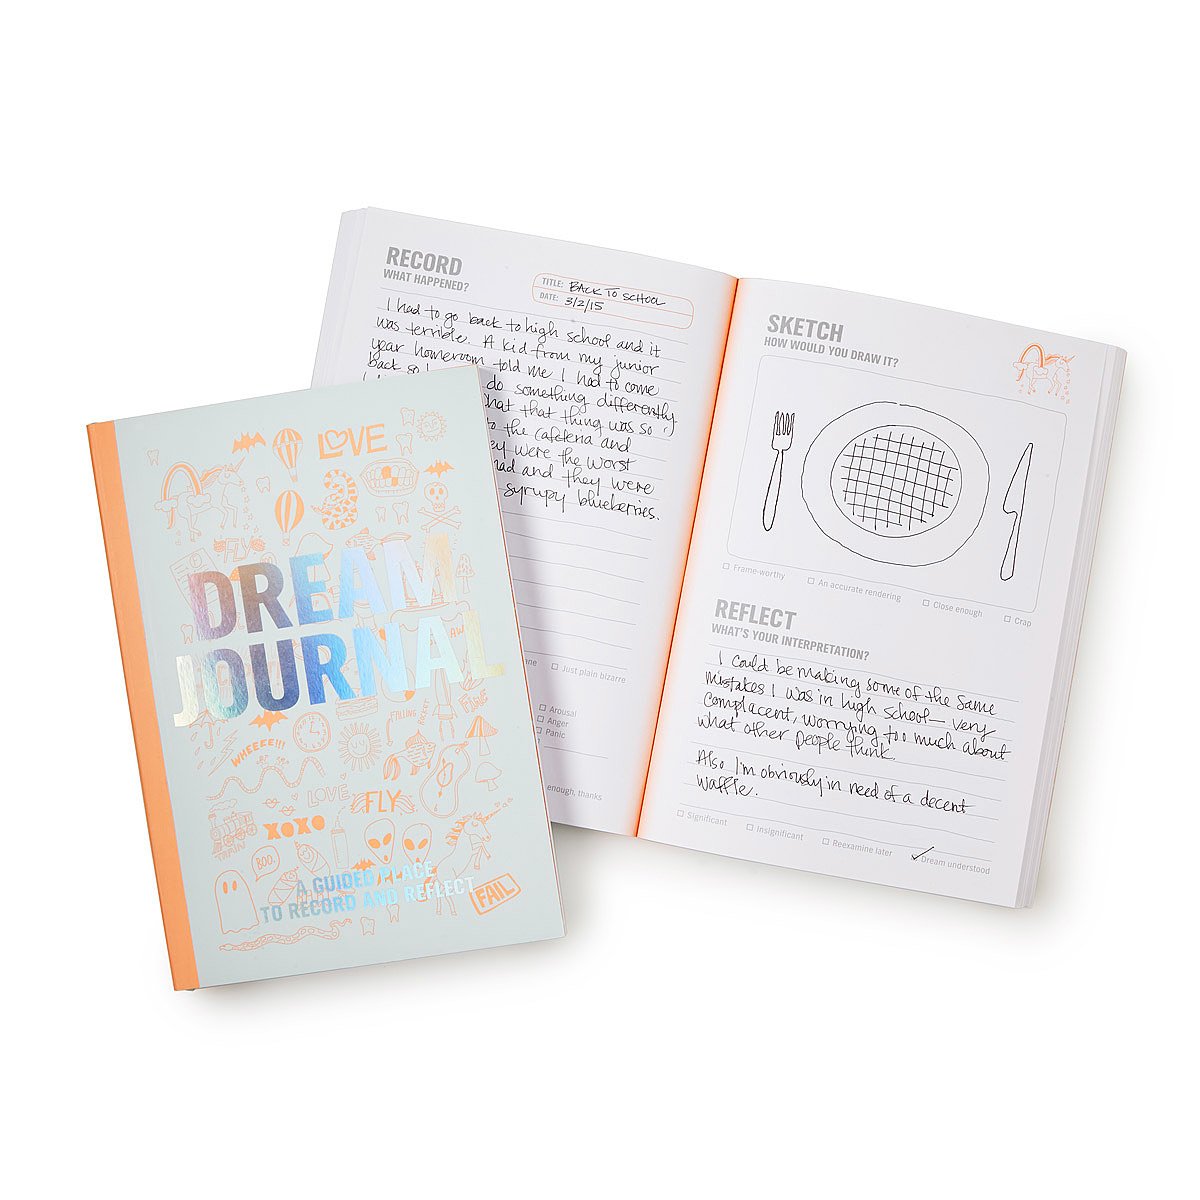 A Dream Journal Dream Analysis UncommonGoods